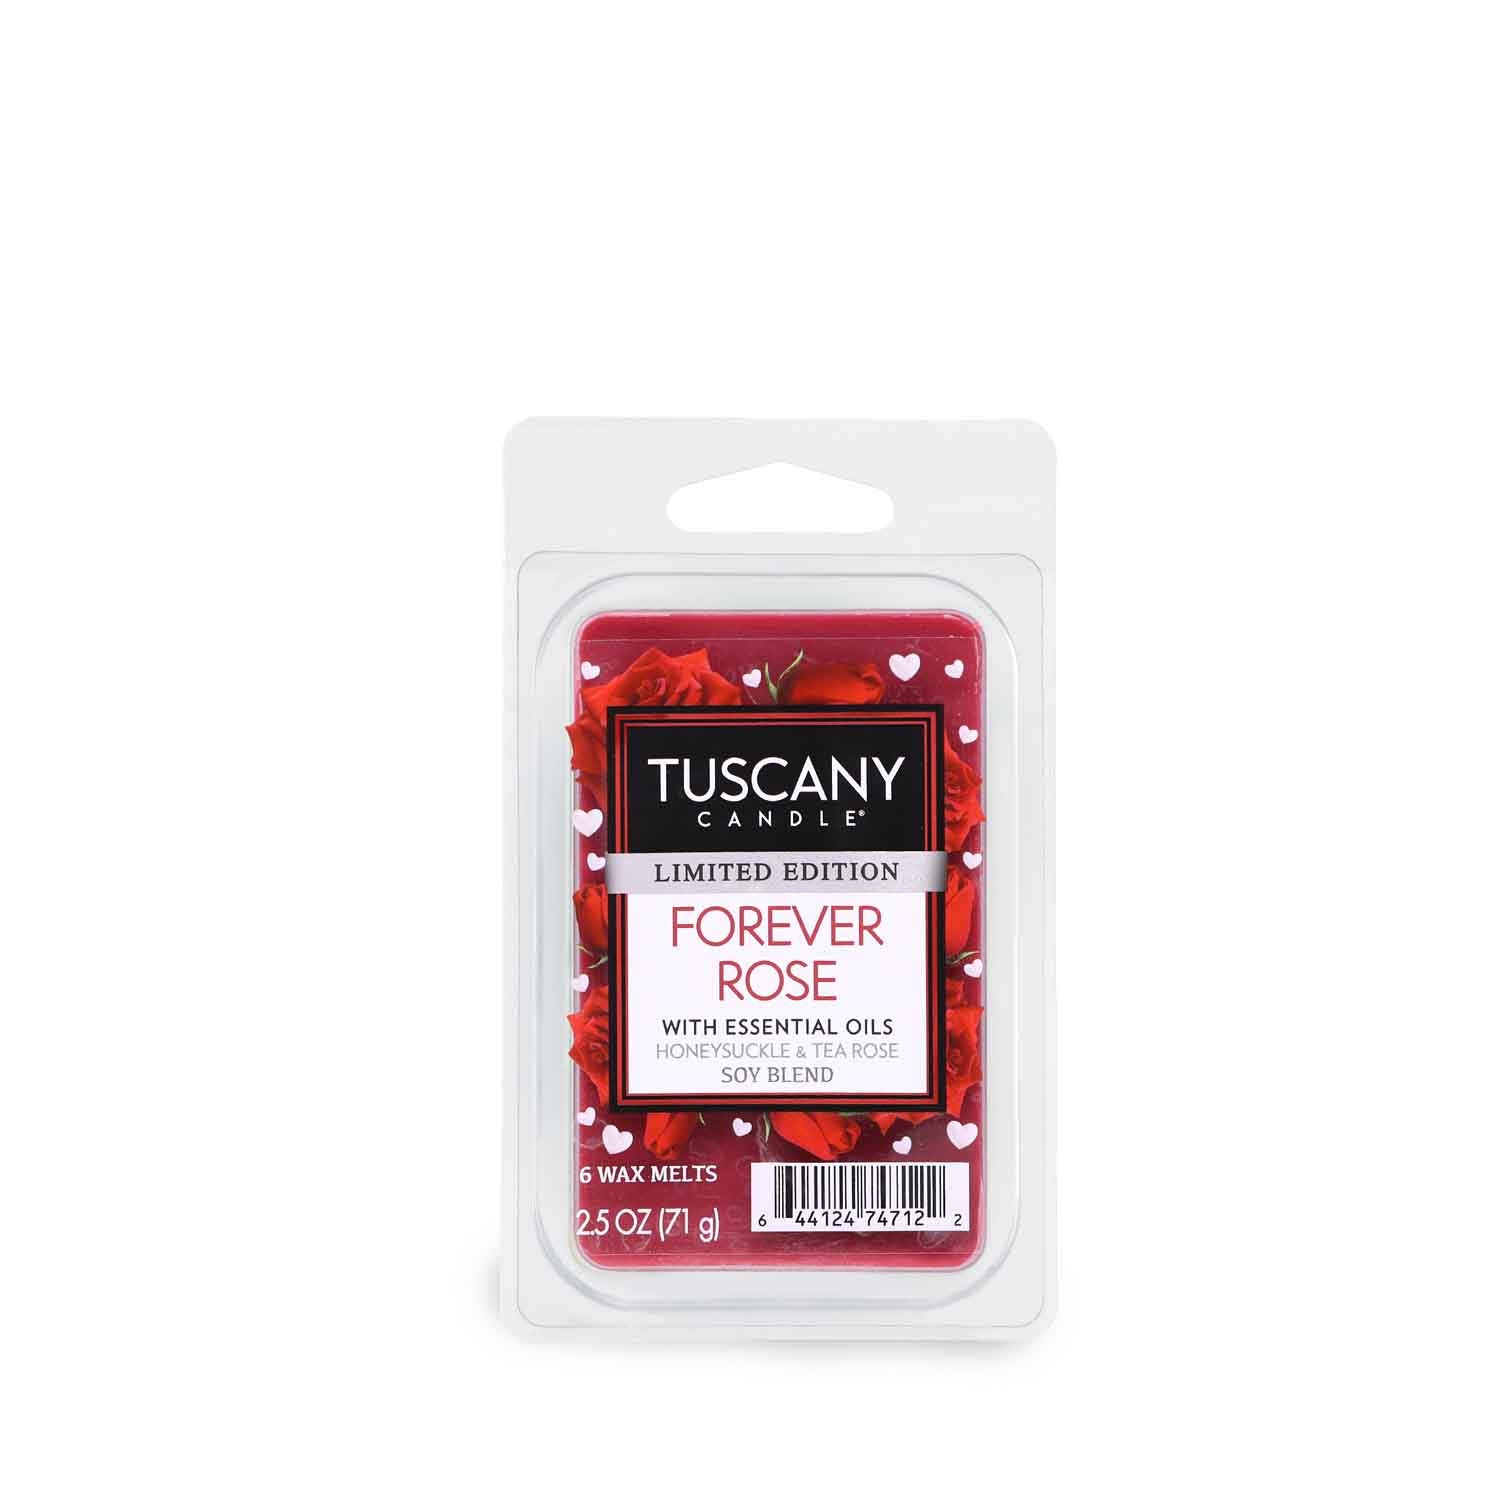 Tuscany Candle® Forever Rose Scented Wax Melt (2.5 oz)